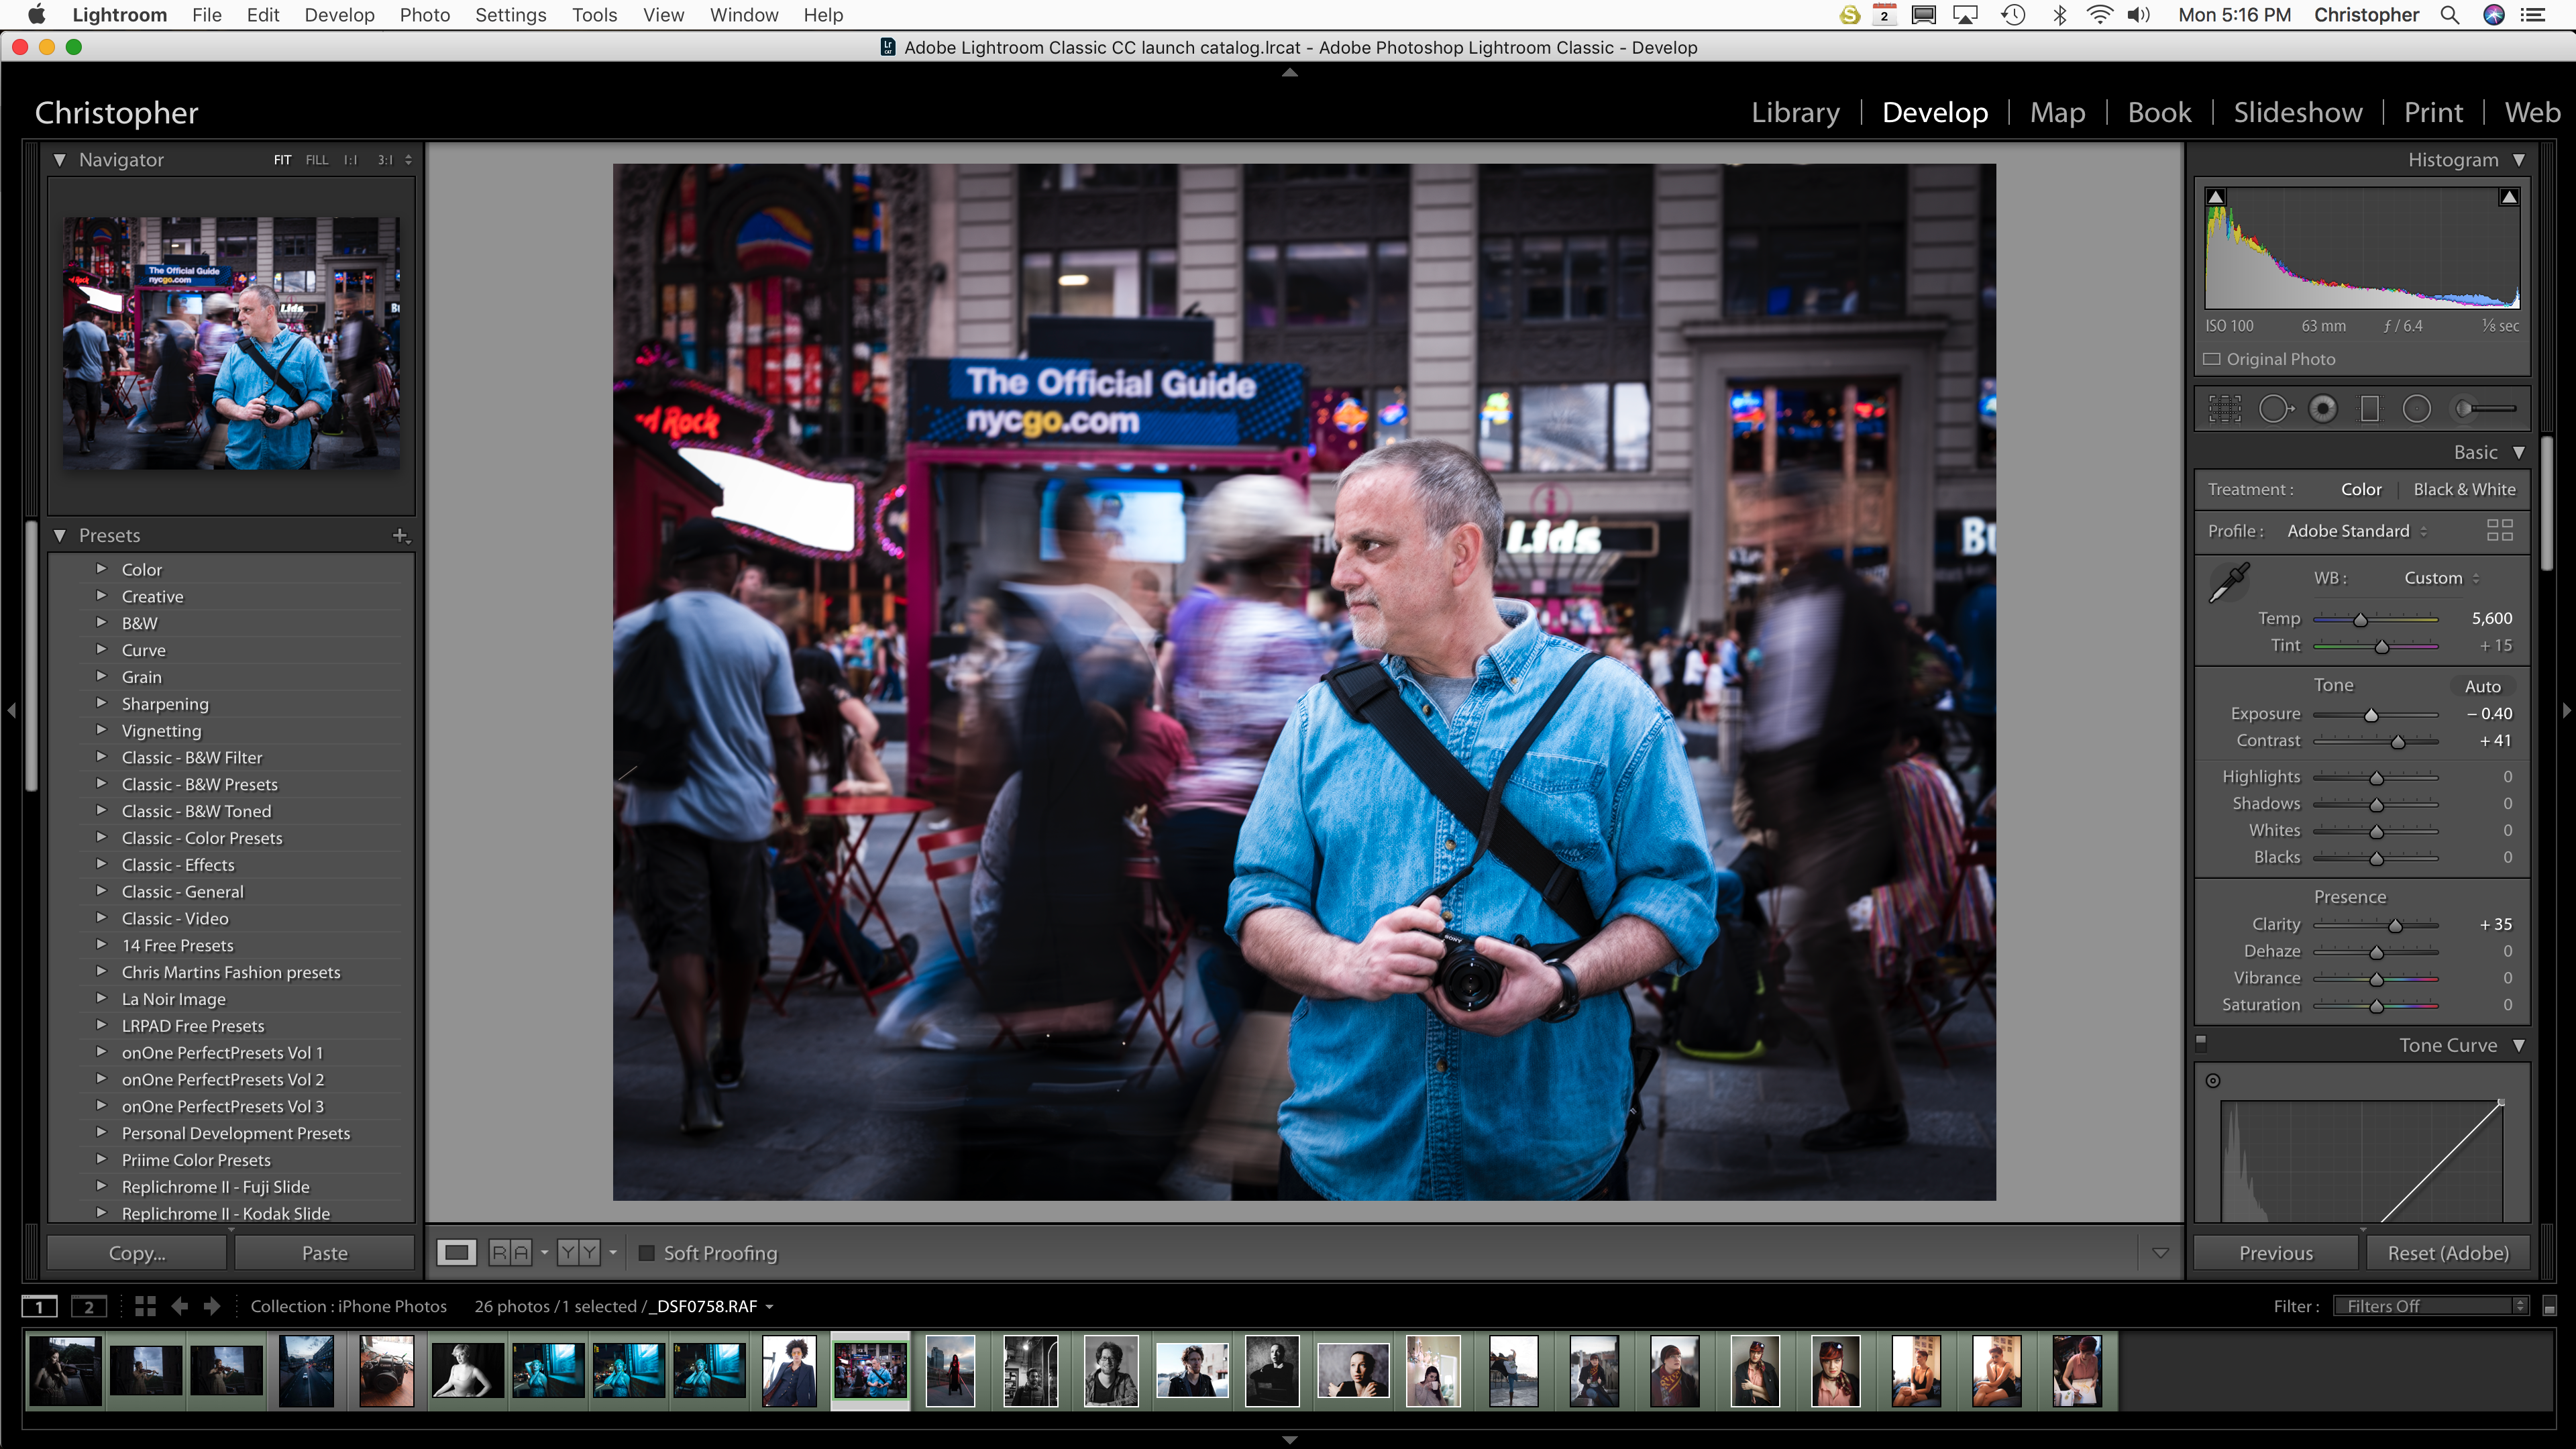 Adobe Lightroom's Latest Update Changes Camera Profiles, Your Presets